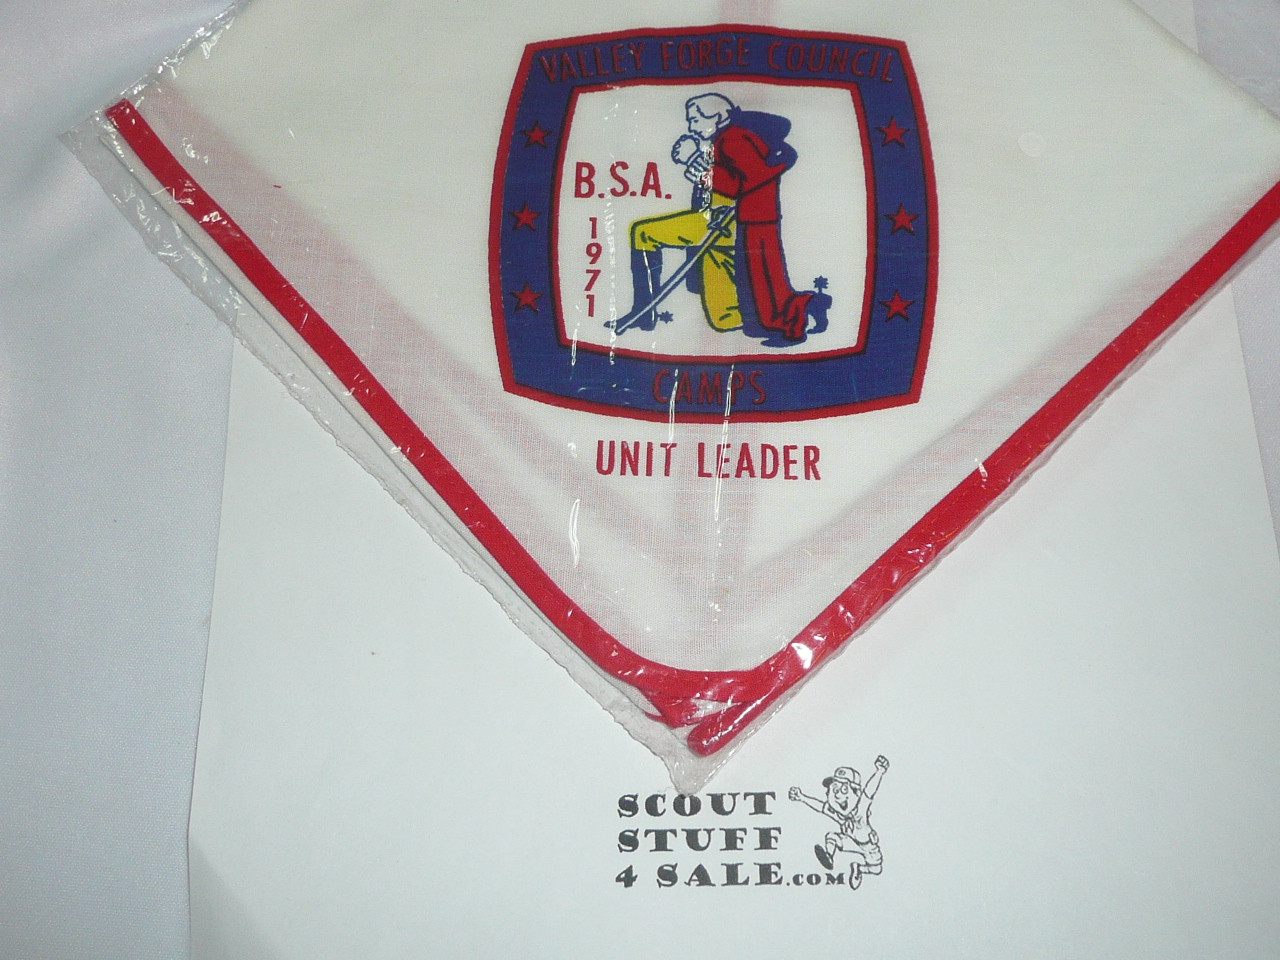 Valley Forge Council Camps Leader Neckerchief, 1971